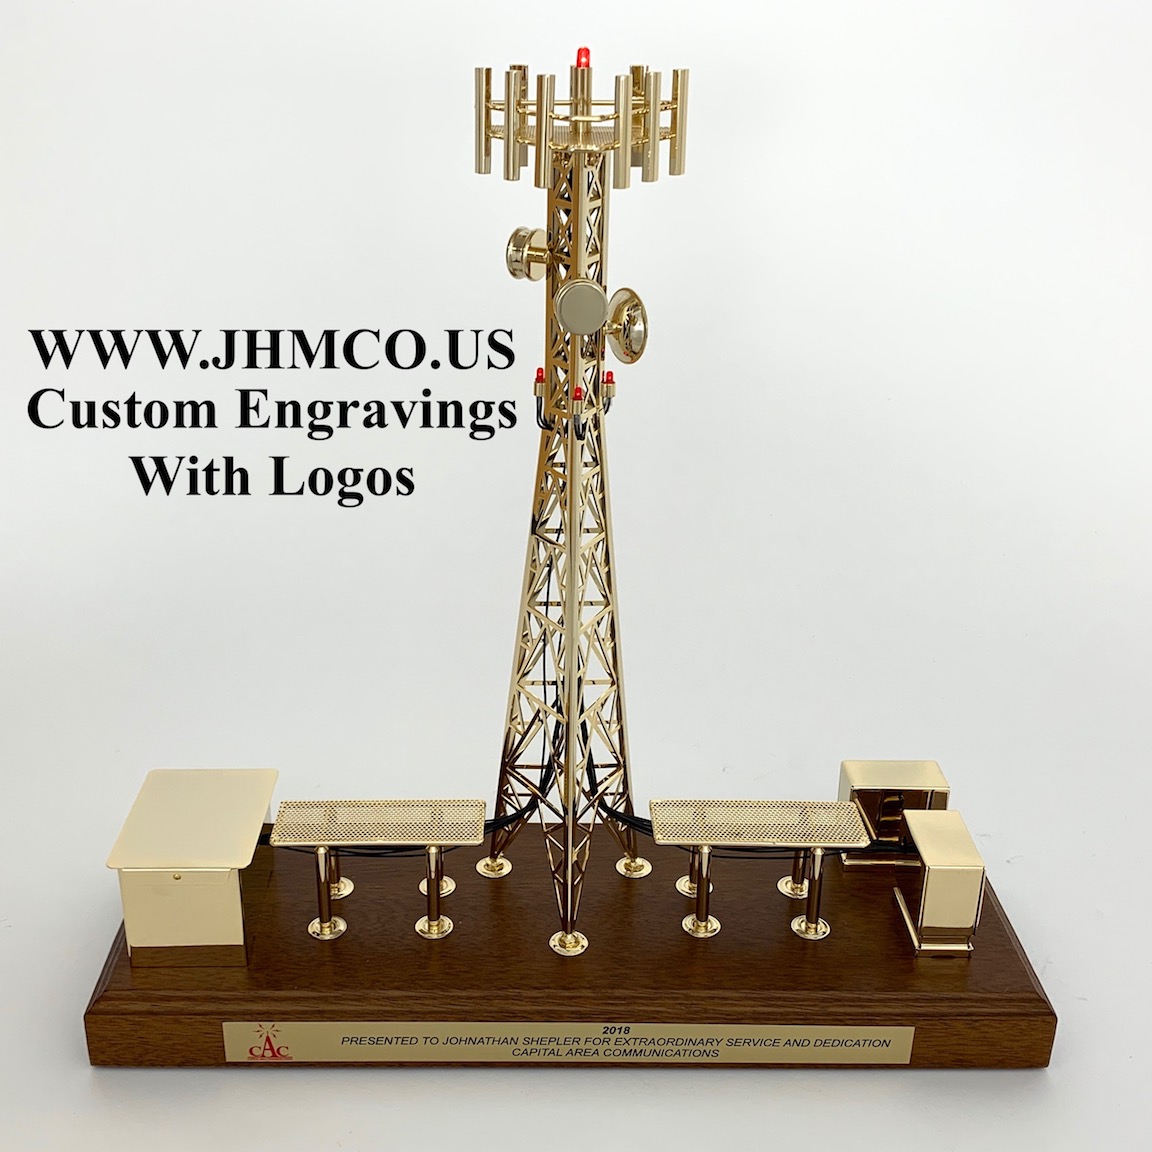 Cell Tower Gift Model Award telecommunications telecom tower climber gift trophy 